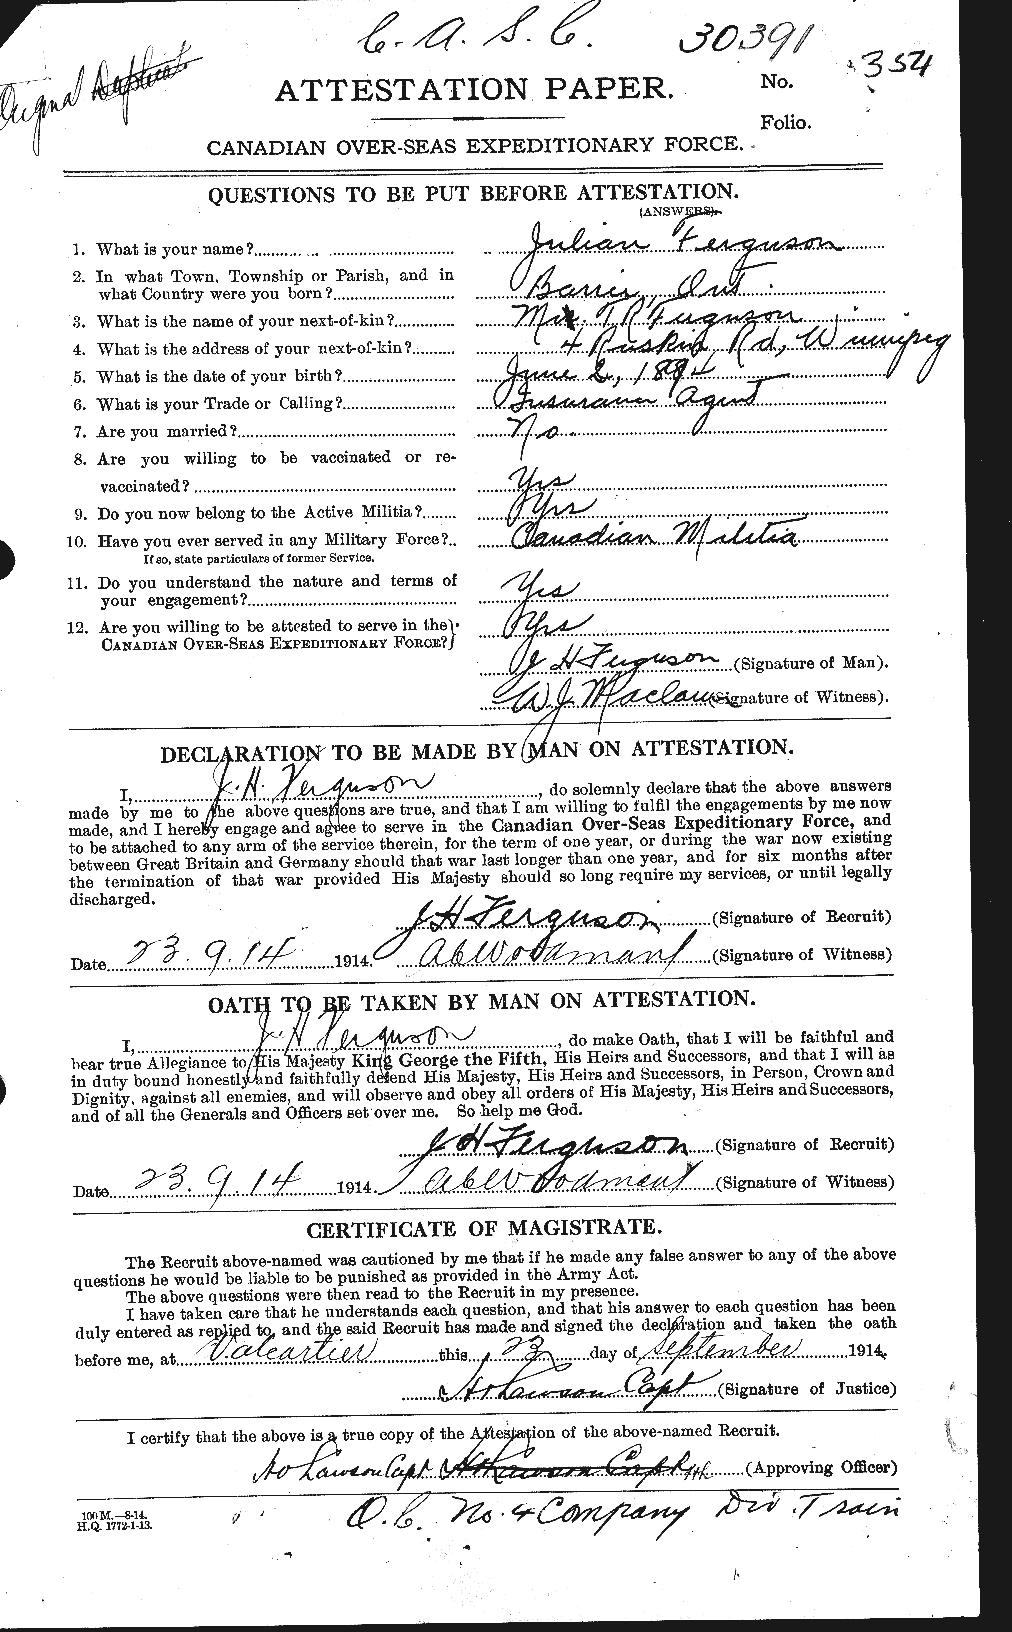 Personnel Records of the First World War - CEF 321134a